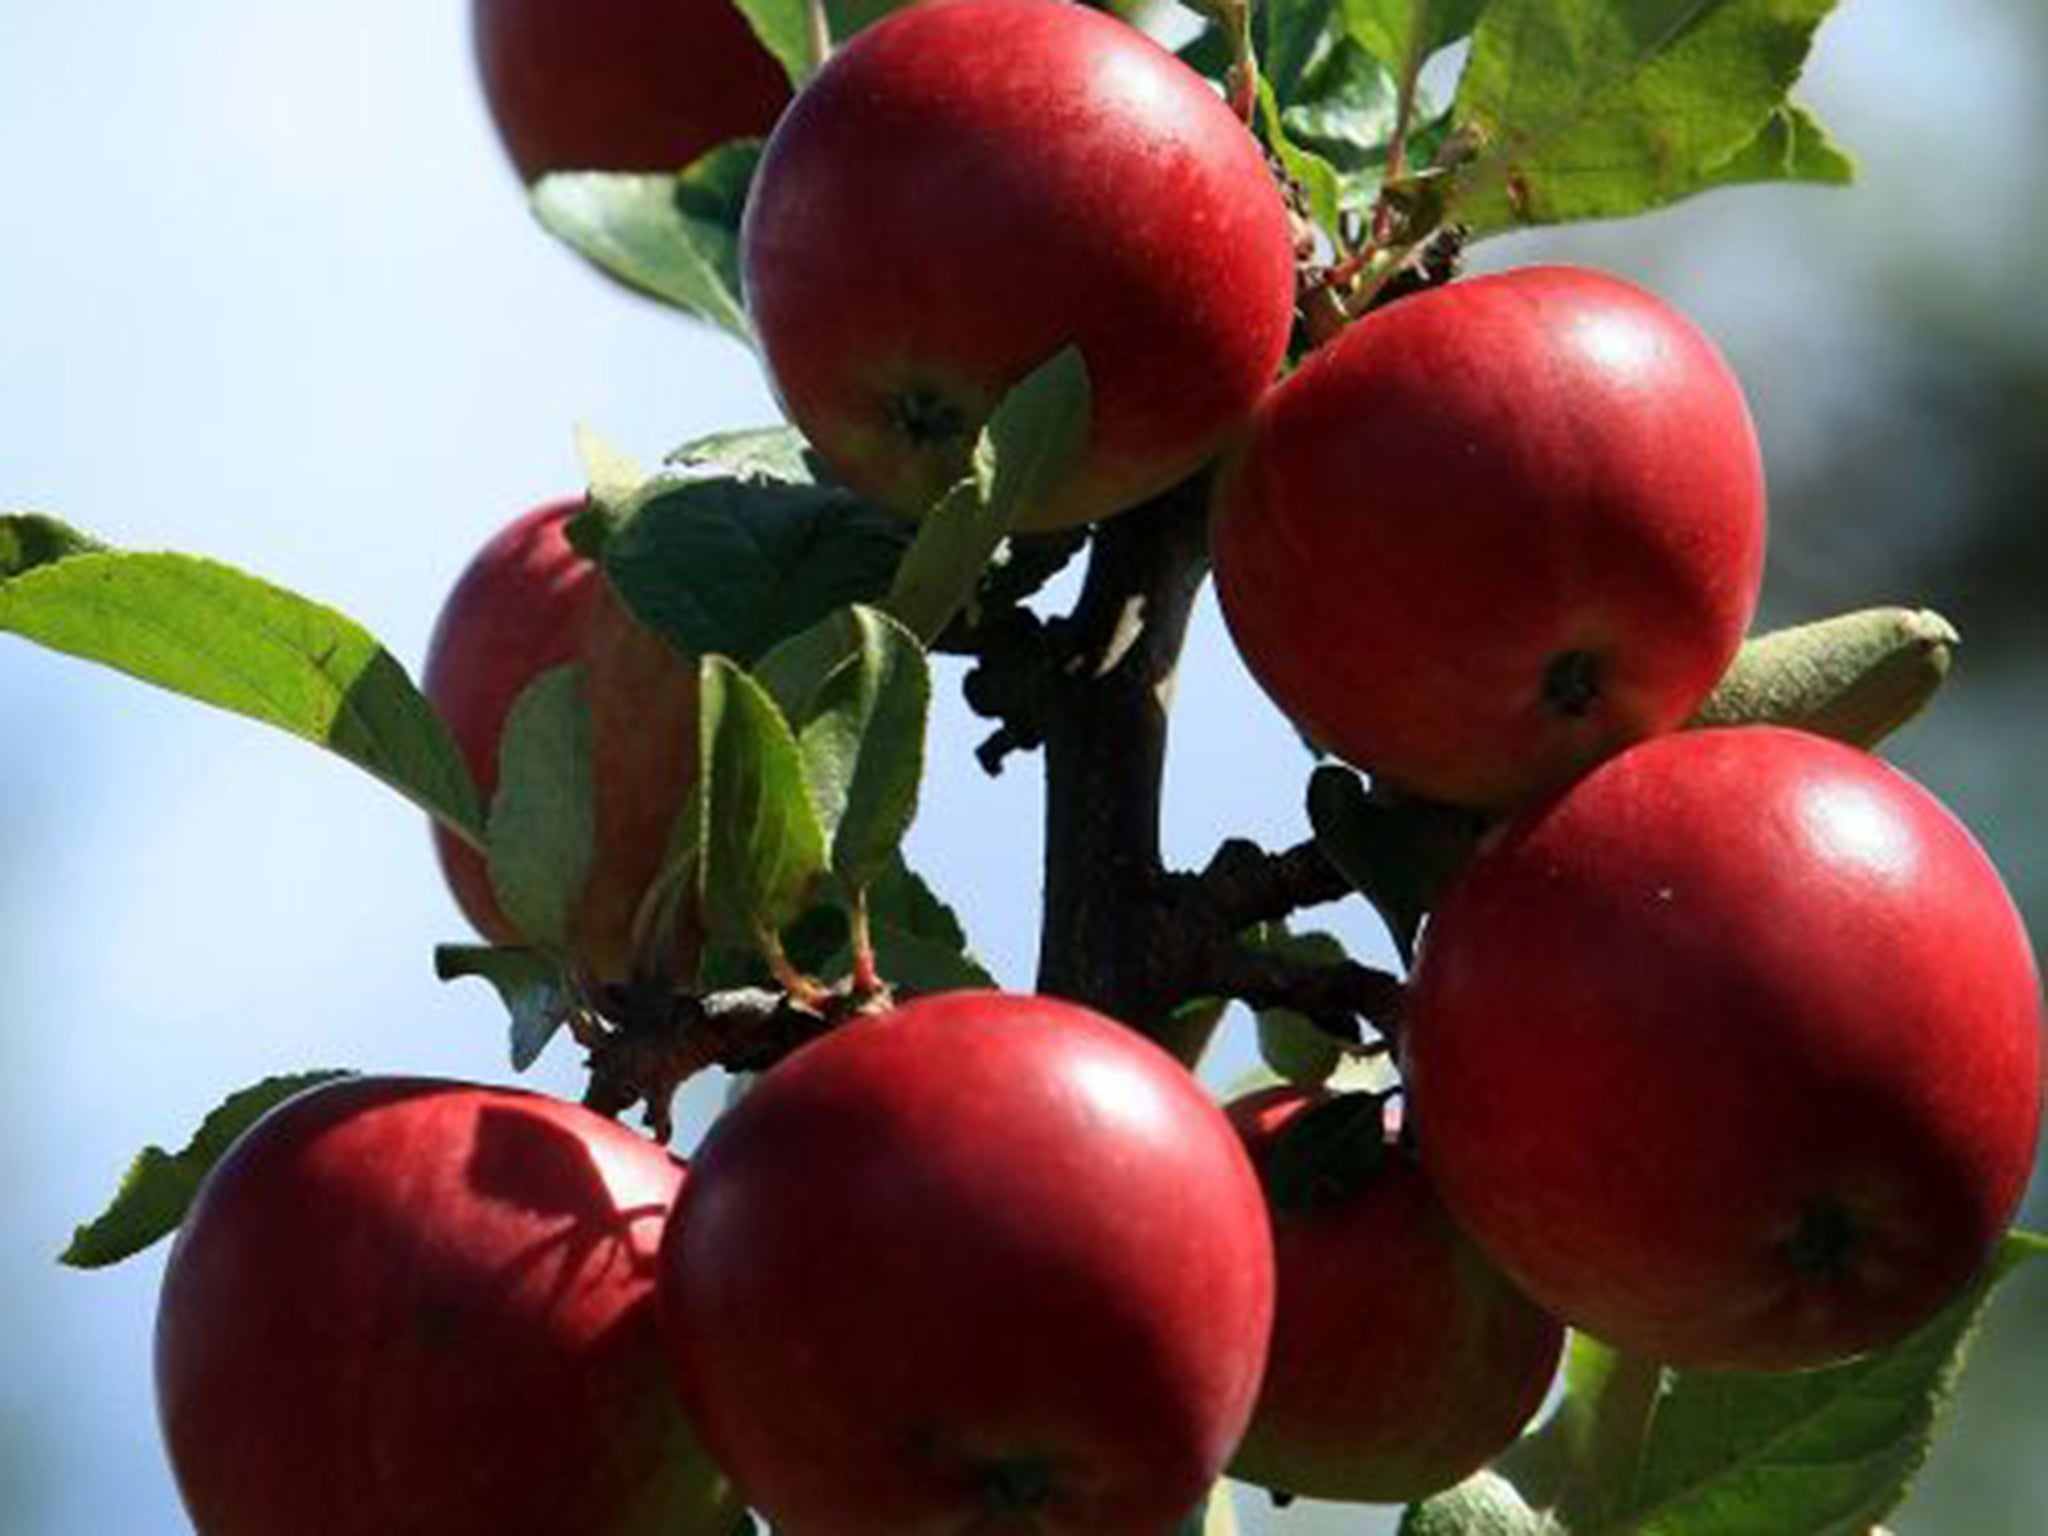 Small-scale cider producers fear a new directive will hit their profits